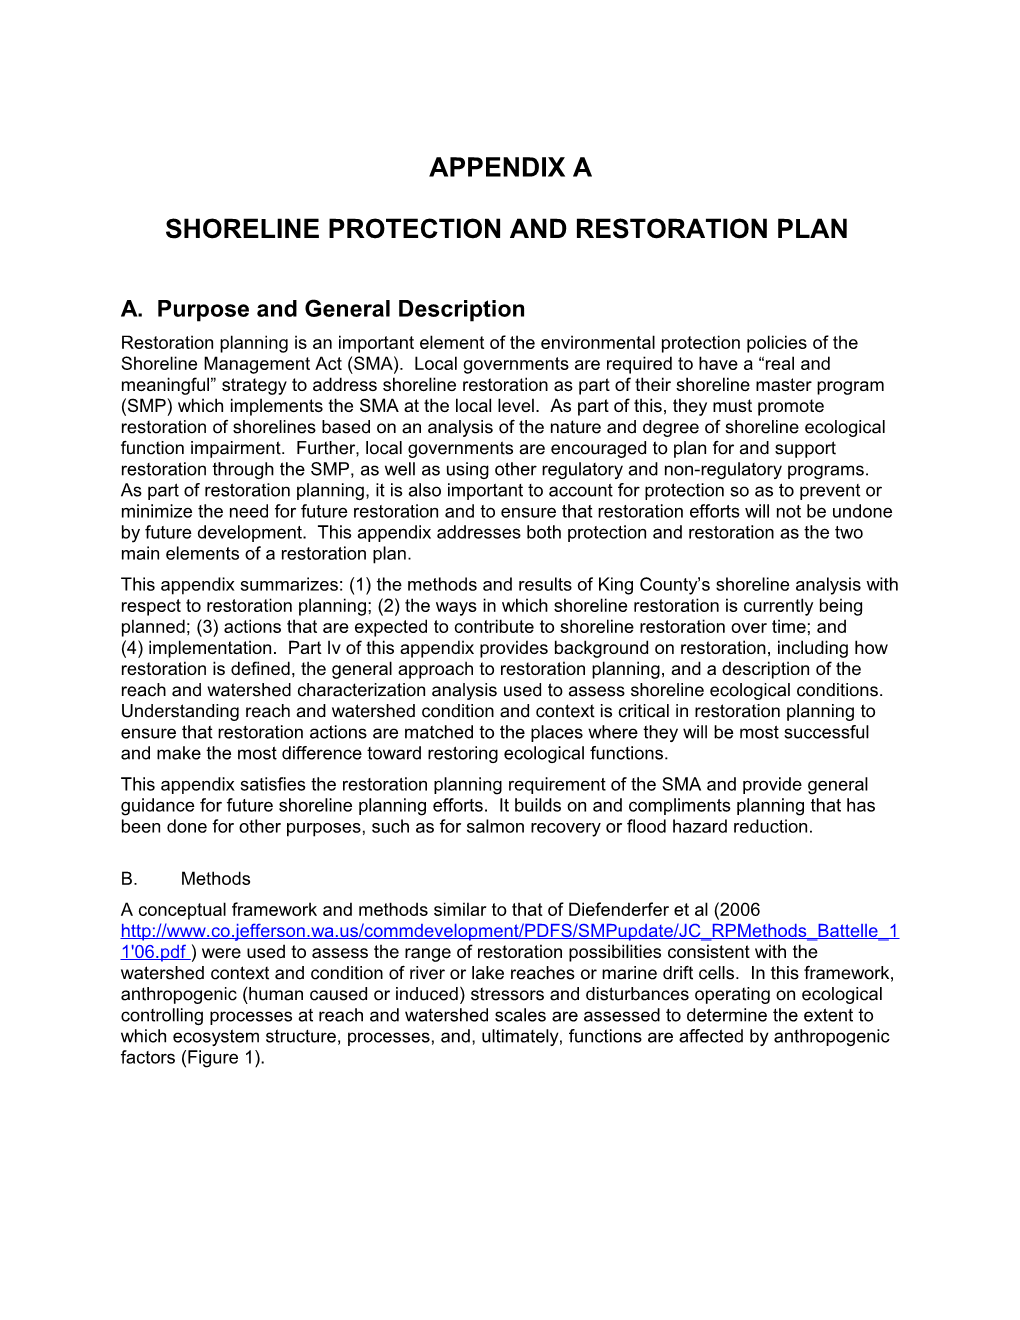 Outline for Shorelines Protection and Restoration Plan (Appendix to Shorelines Plan Goal